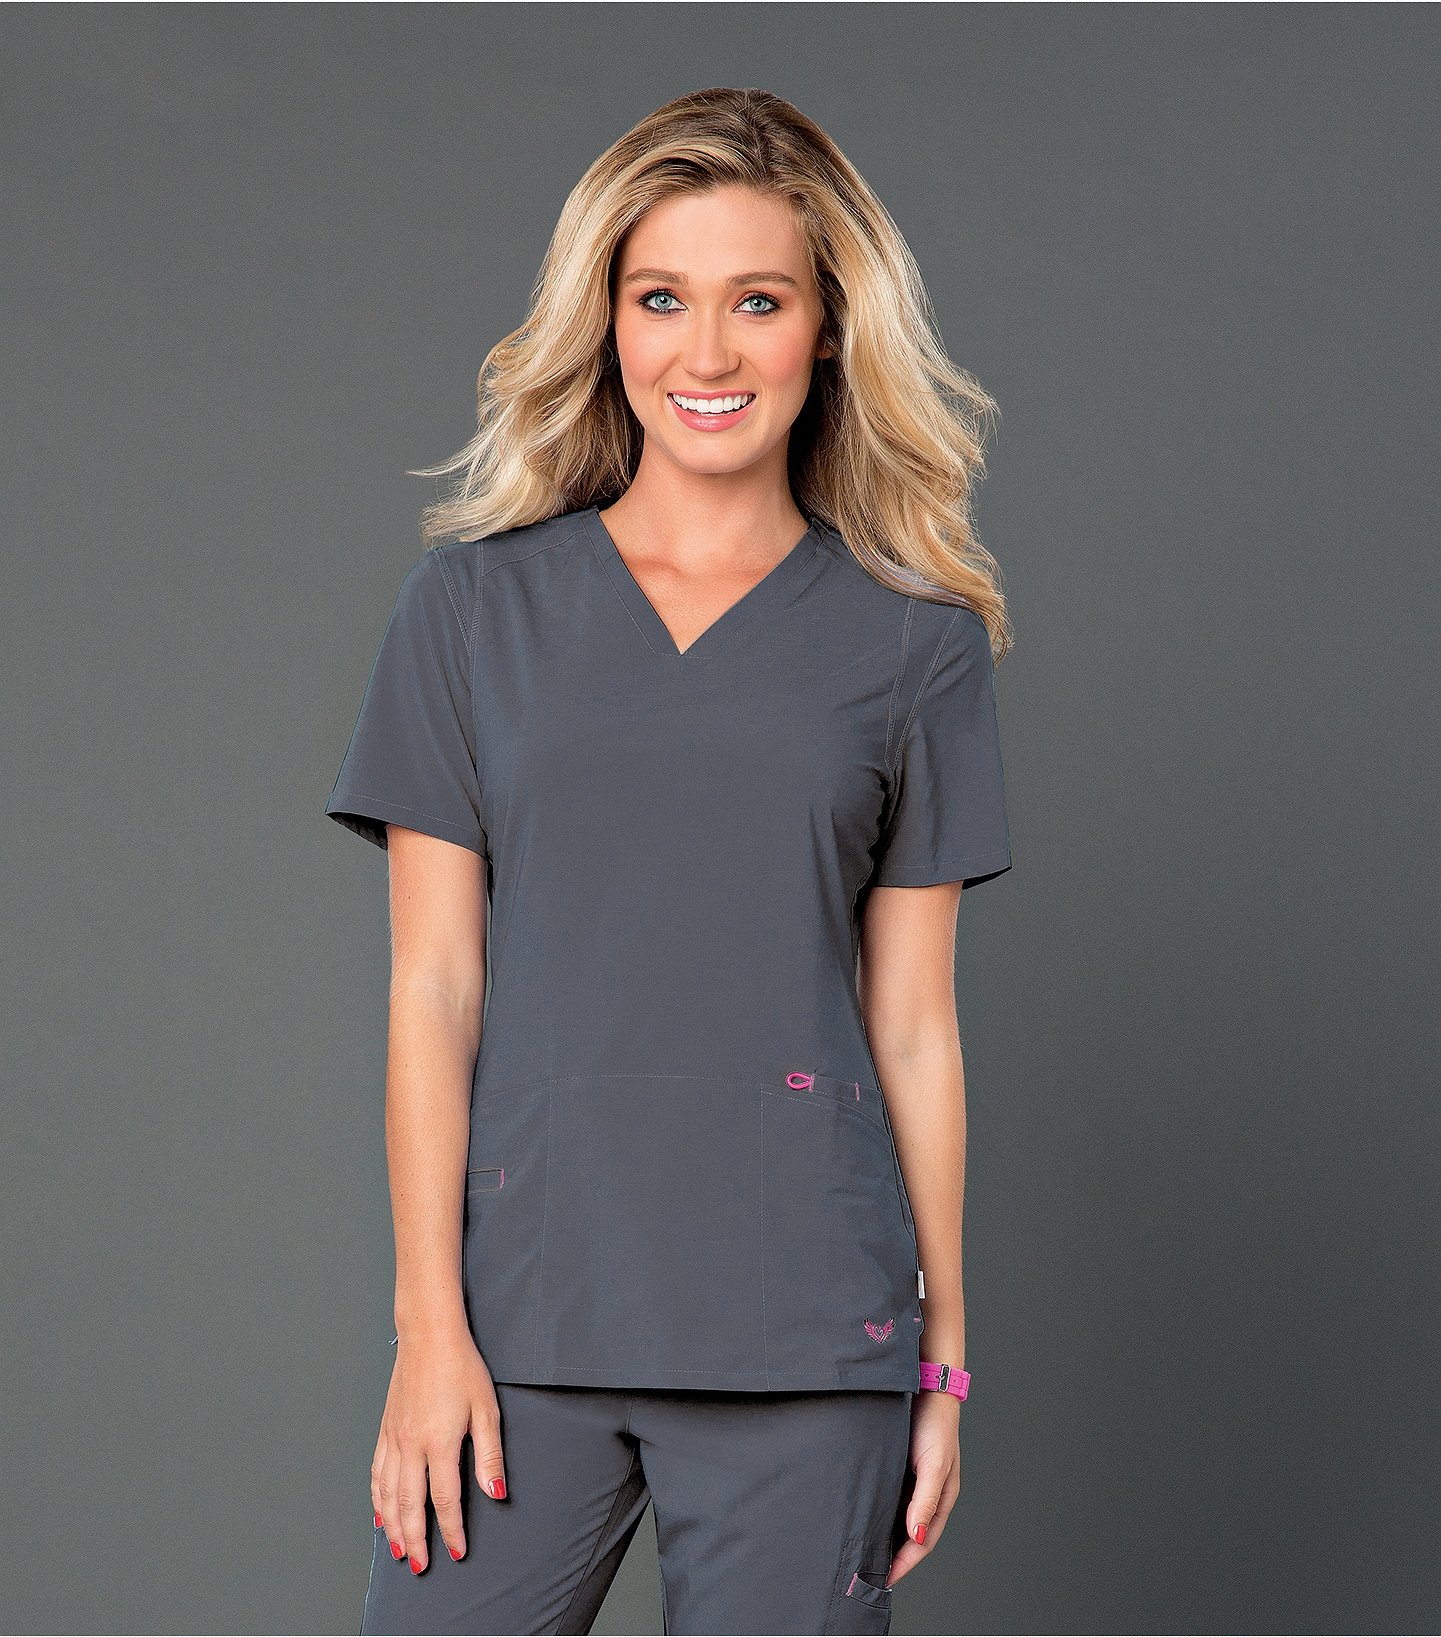 Smitten Women's Solid Athletic Fit VNeck Scrub TopS101002 Medical